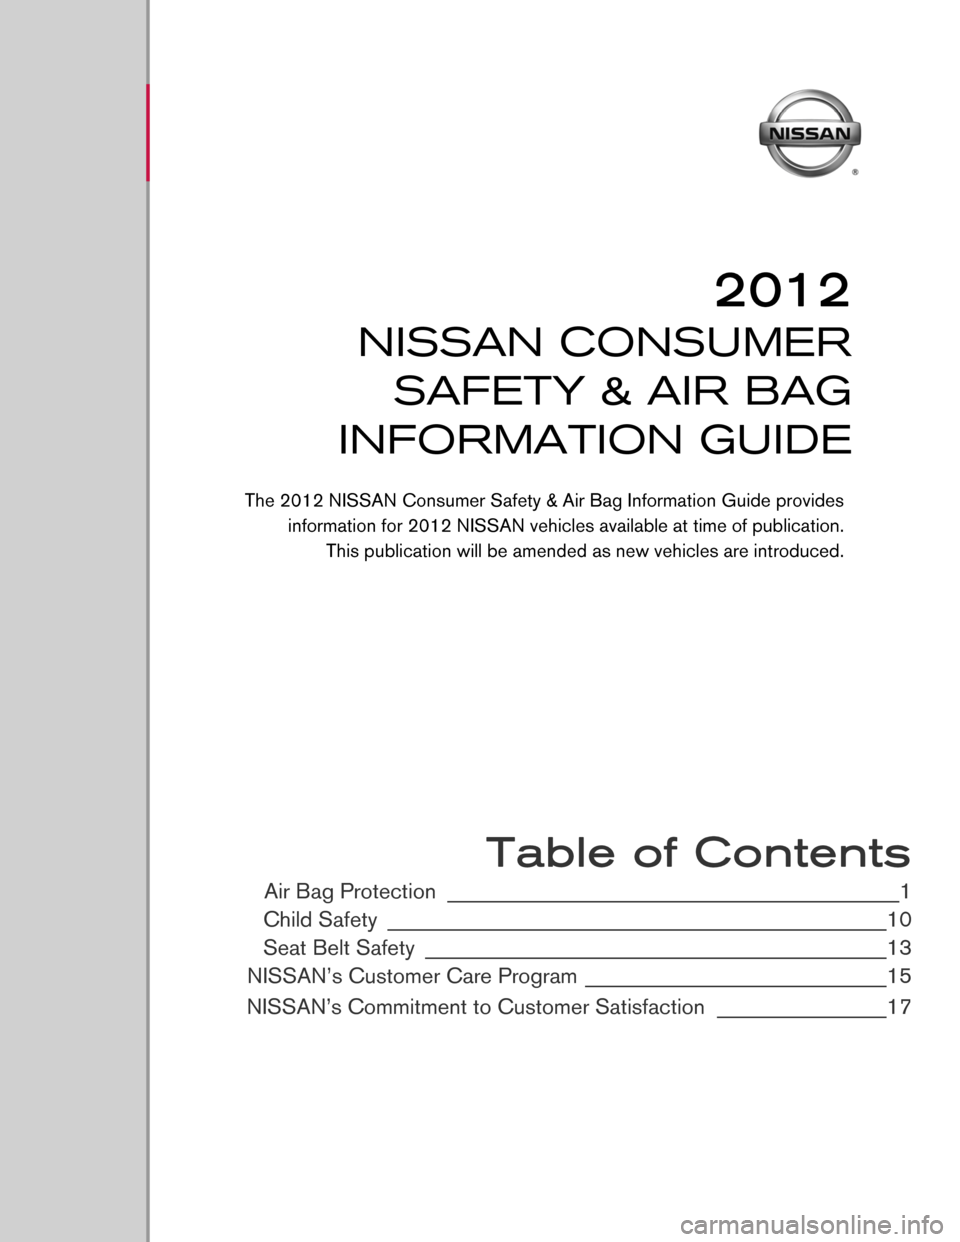 NISSAN 370Z ROADSTER 2012 Z34 Consumer Safety Air Bag Information Guide 